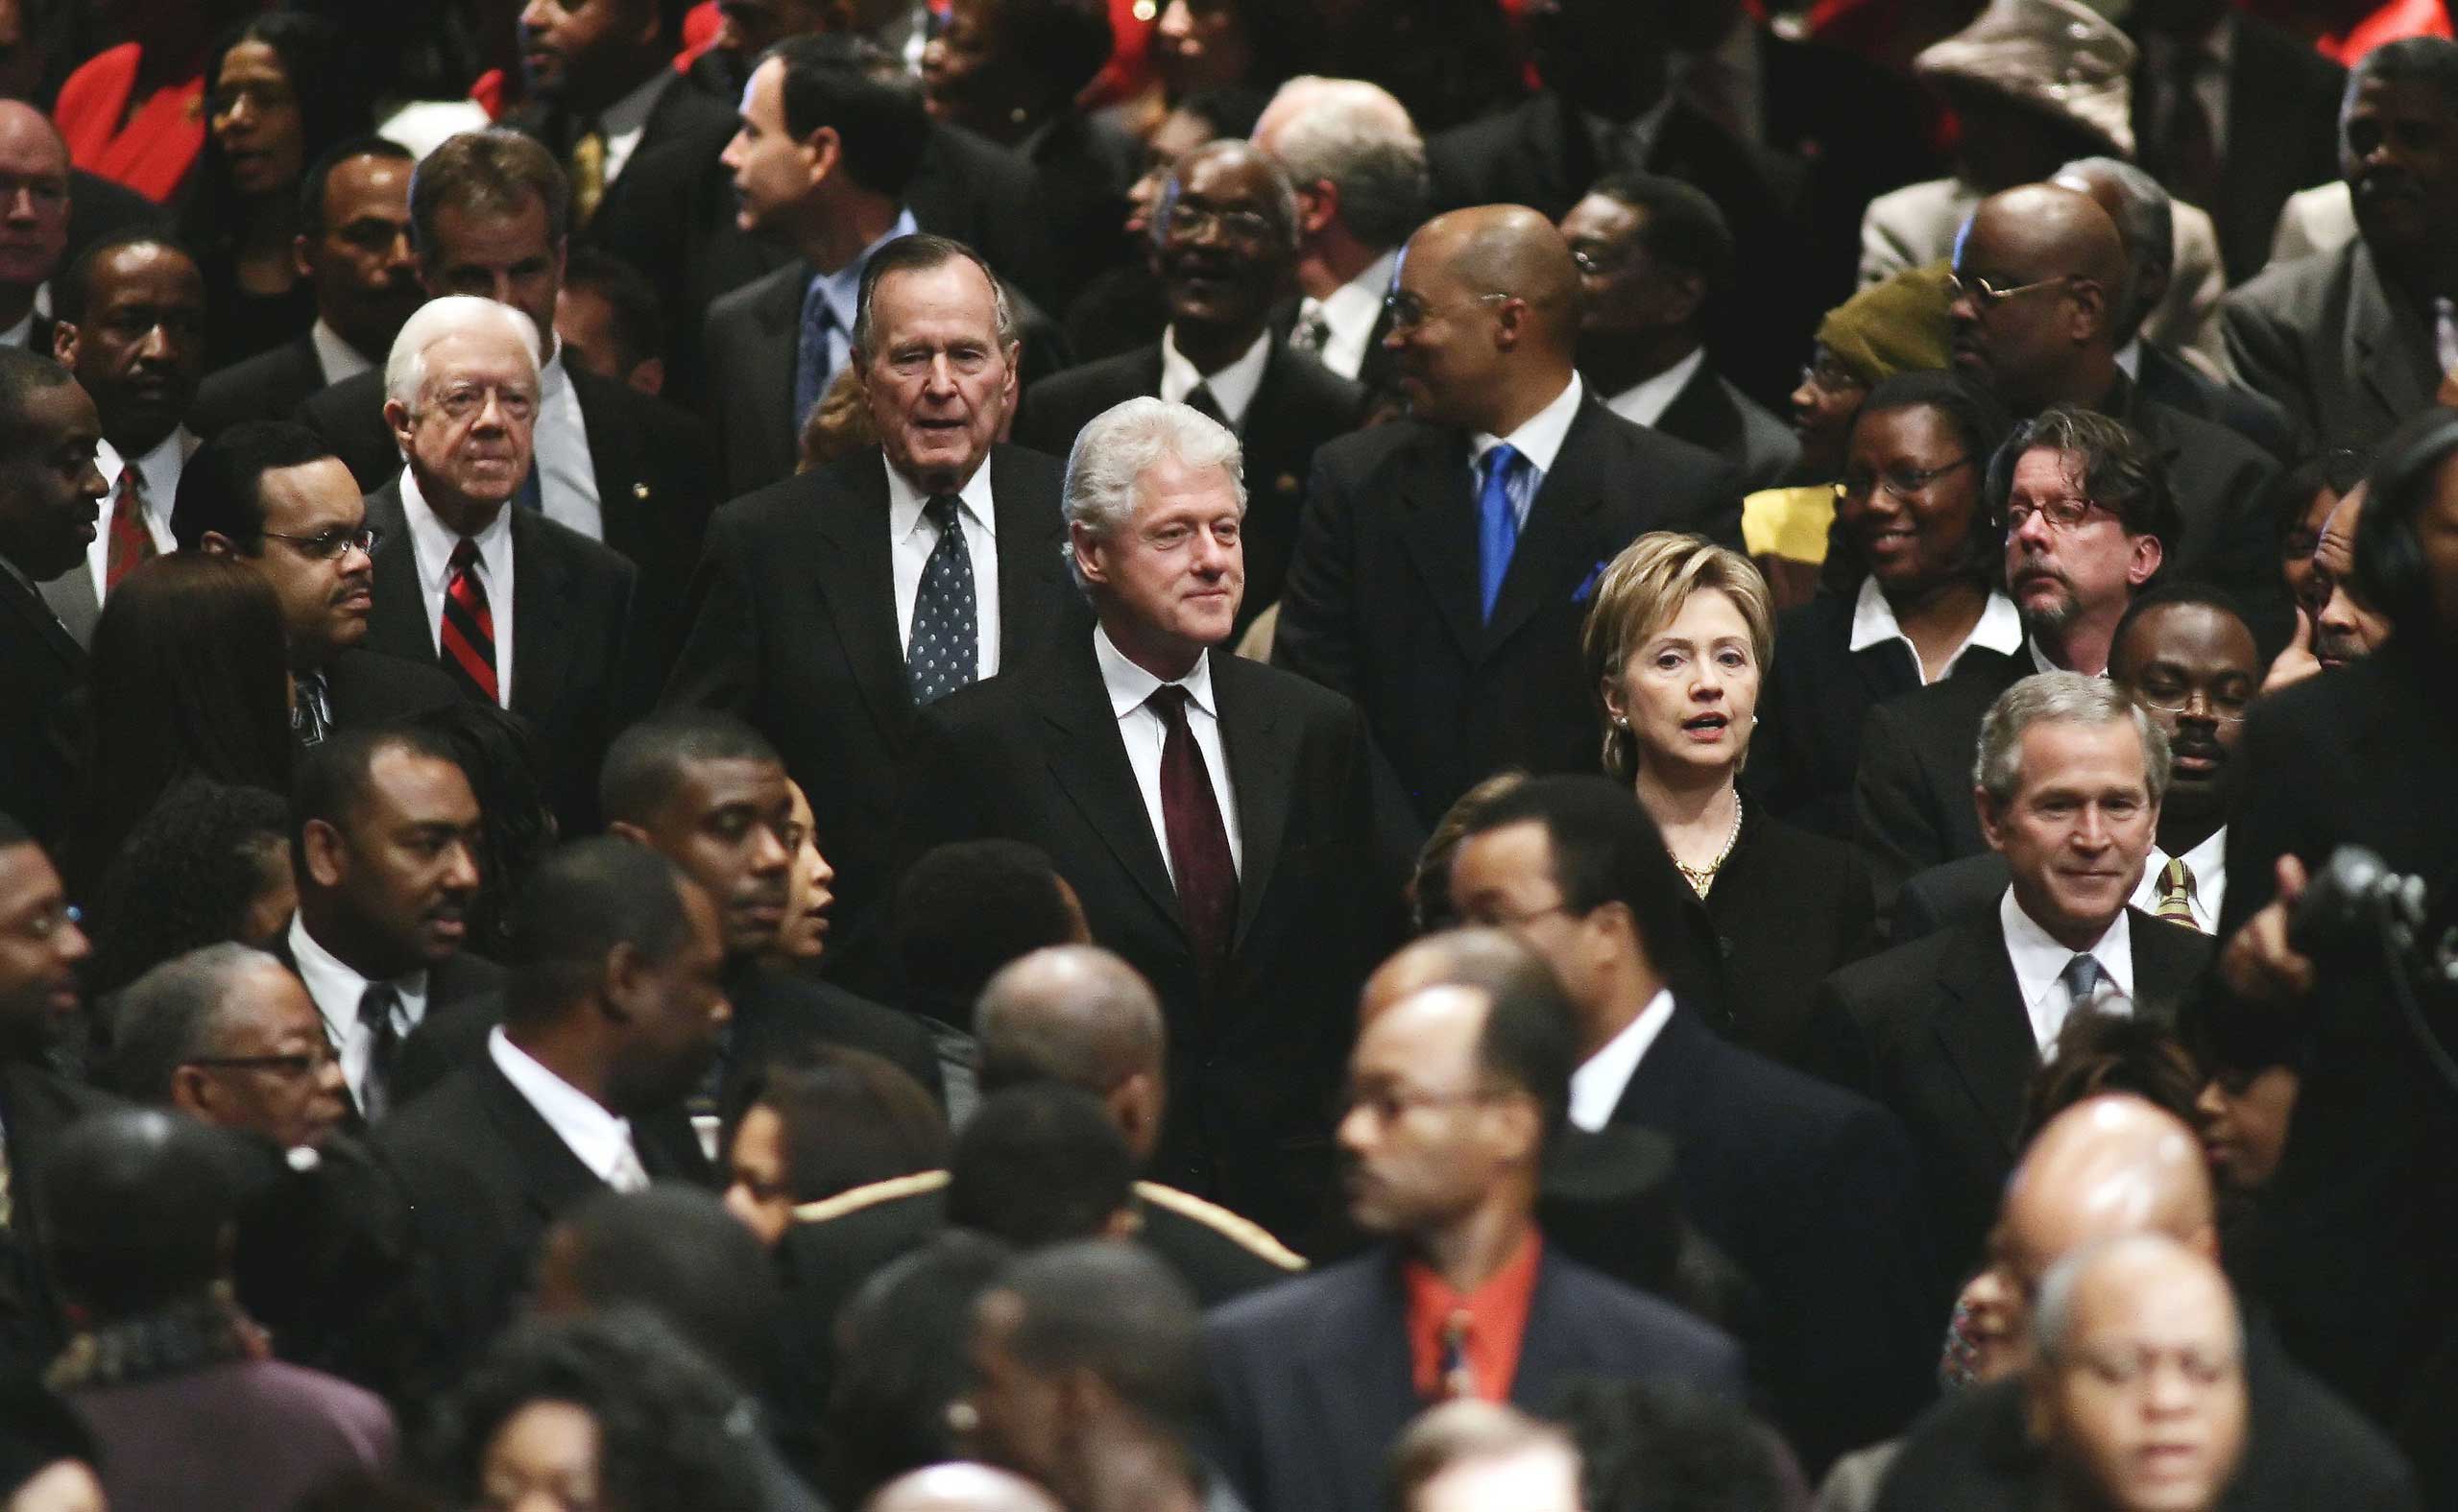 President George Bush, U.S. Sen. Hillary Clinton (D-NY), former U.S. President Bill Clinton, former U.S. President George H. W. Bush, and former U.S. President Jimmy Carter walk through the crowd during the funeral for Coretta Scott King at the New  Birth Missionary Baptist Church in Lithonia, Ga. on Feb. 7, 2006.